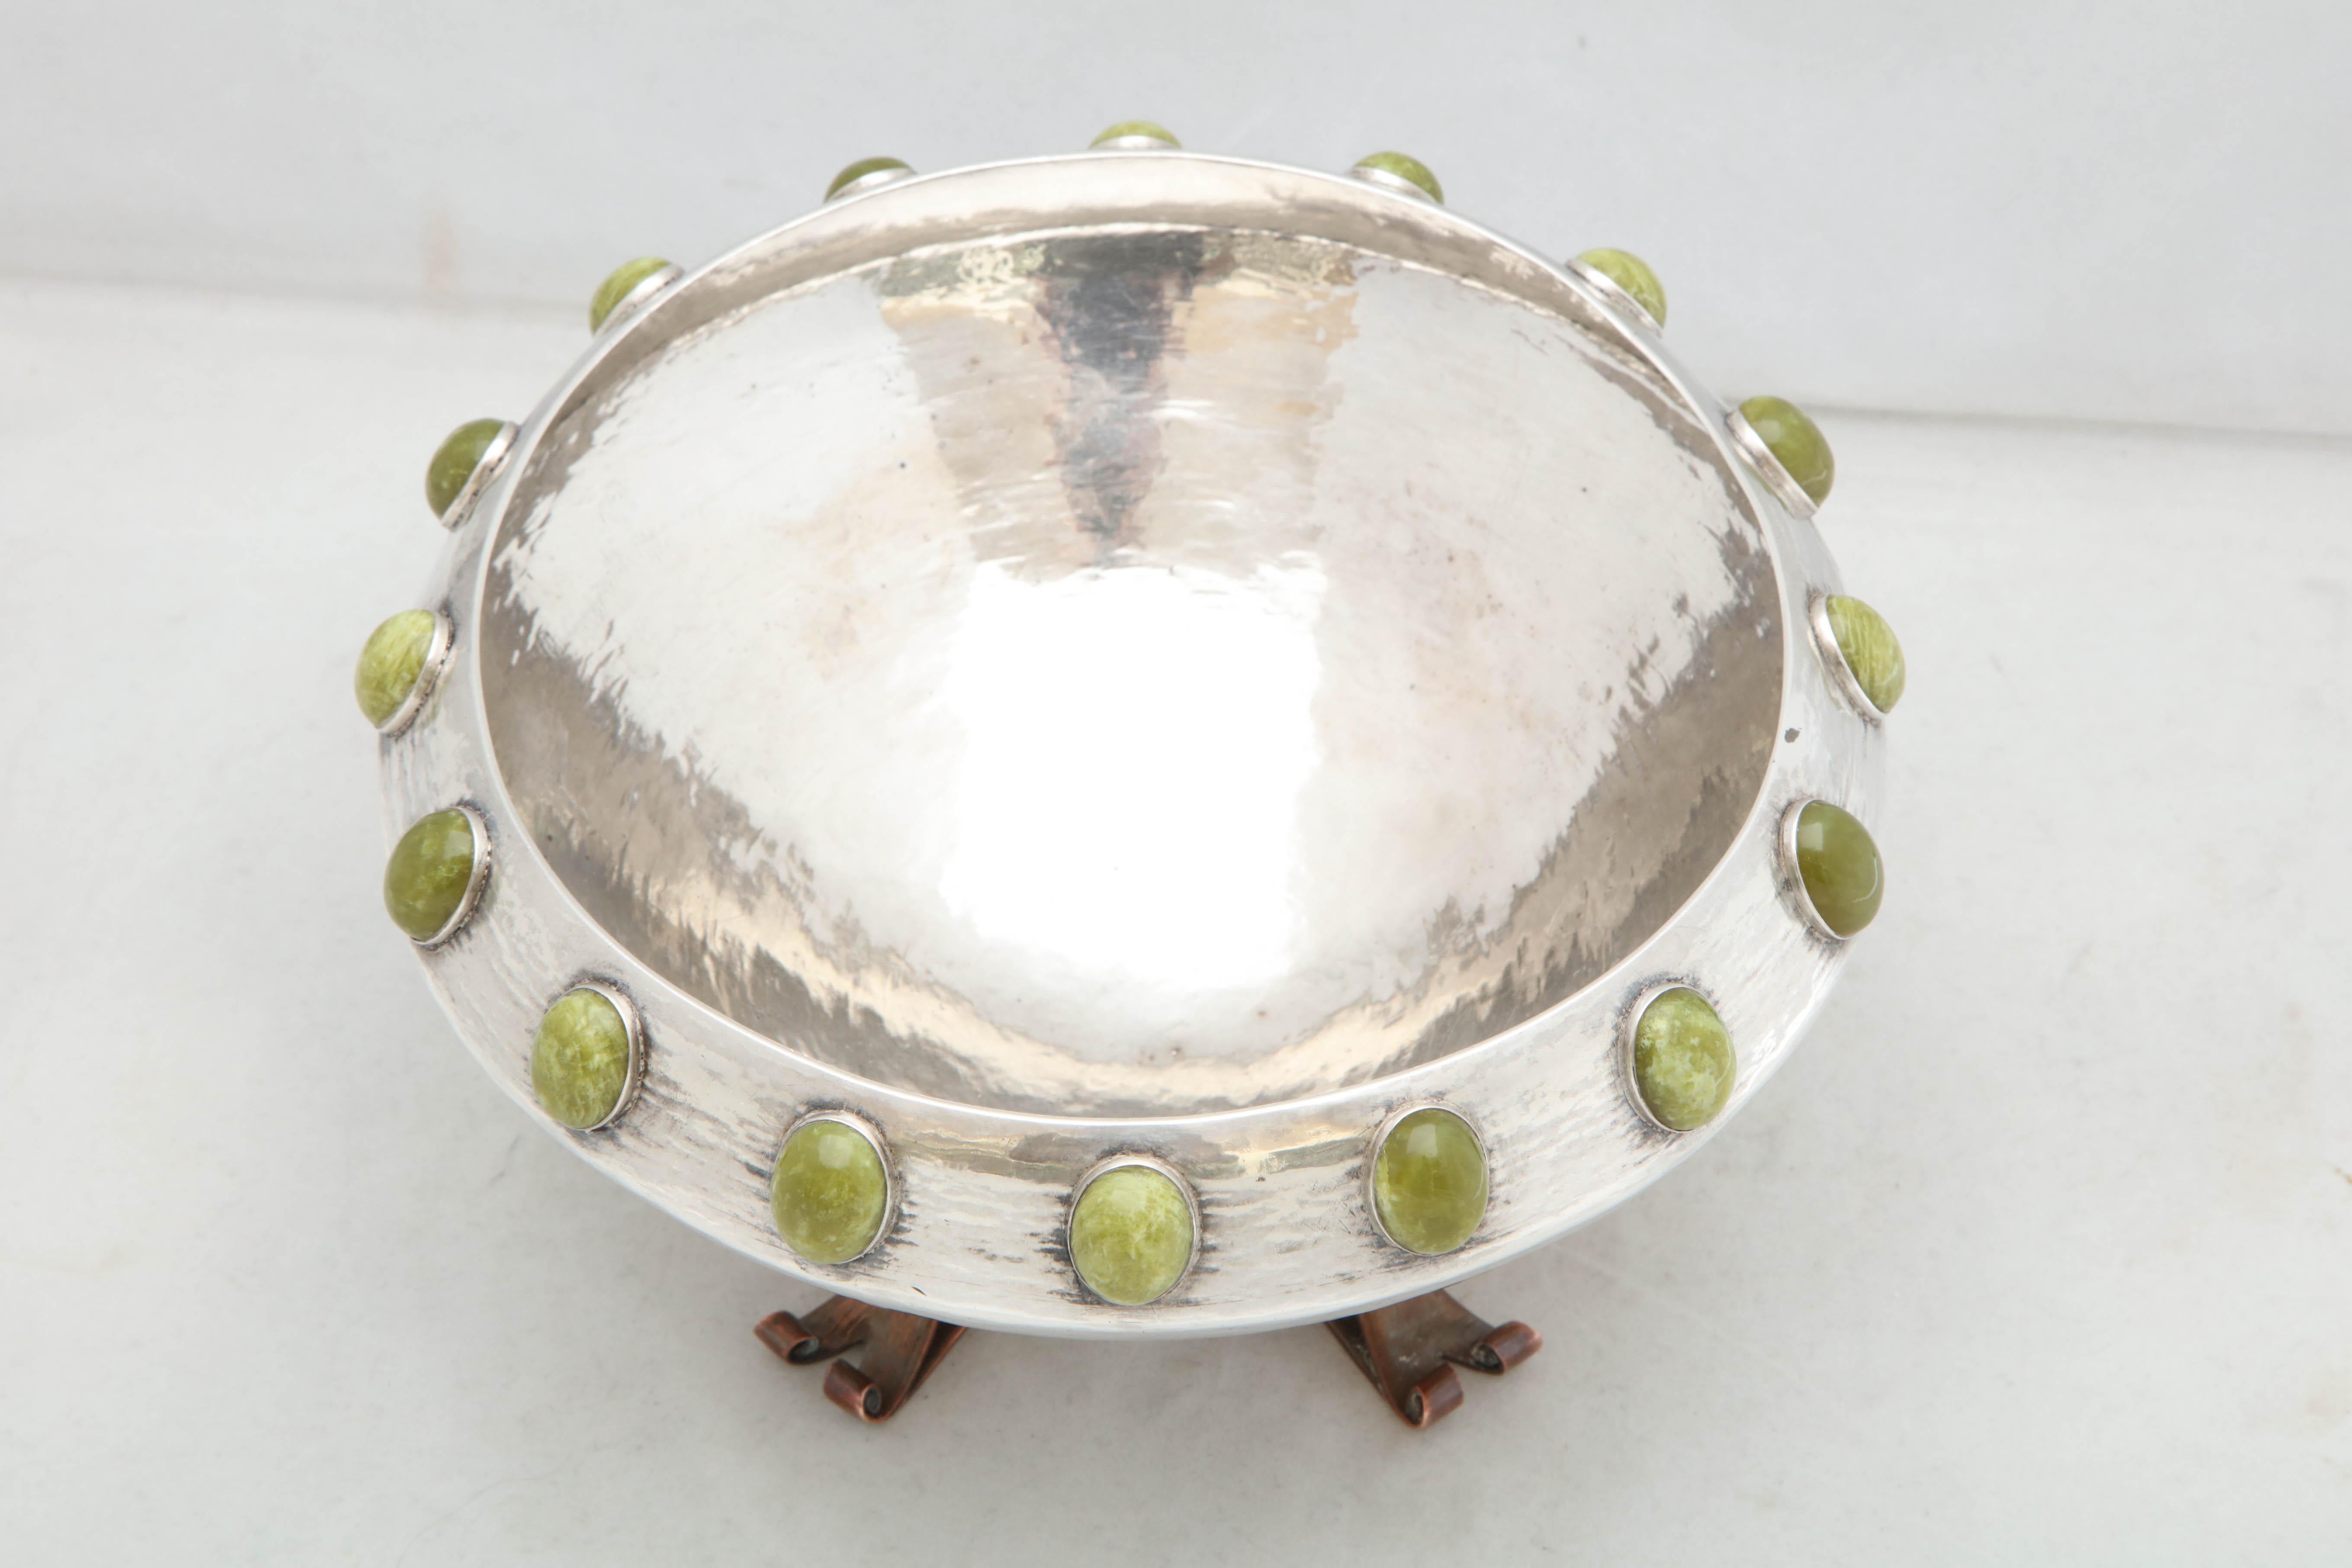 Late 19th Century Arts & Crafts, Sterling Silver, Mixed Metals and Hardstone Bowl